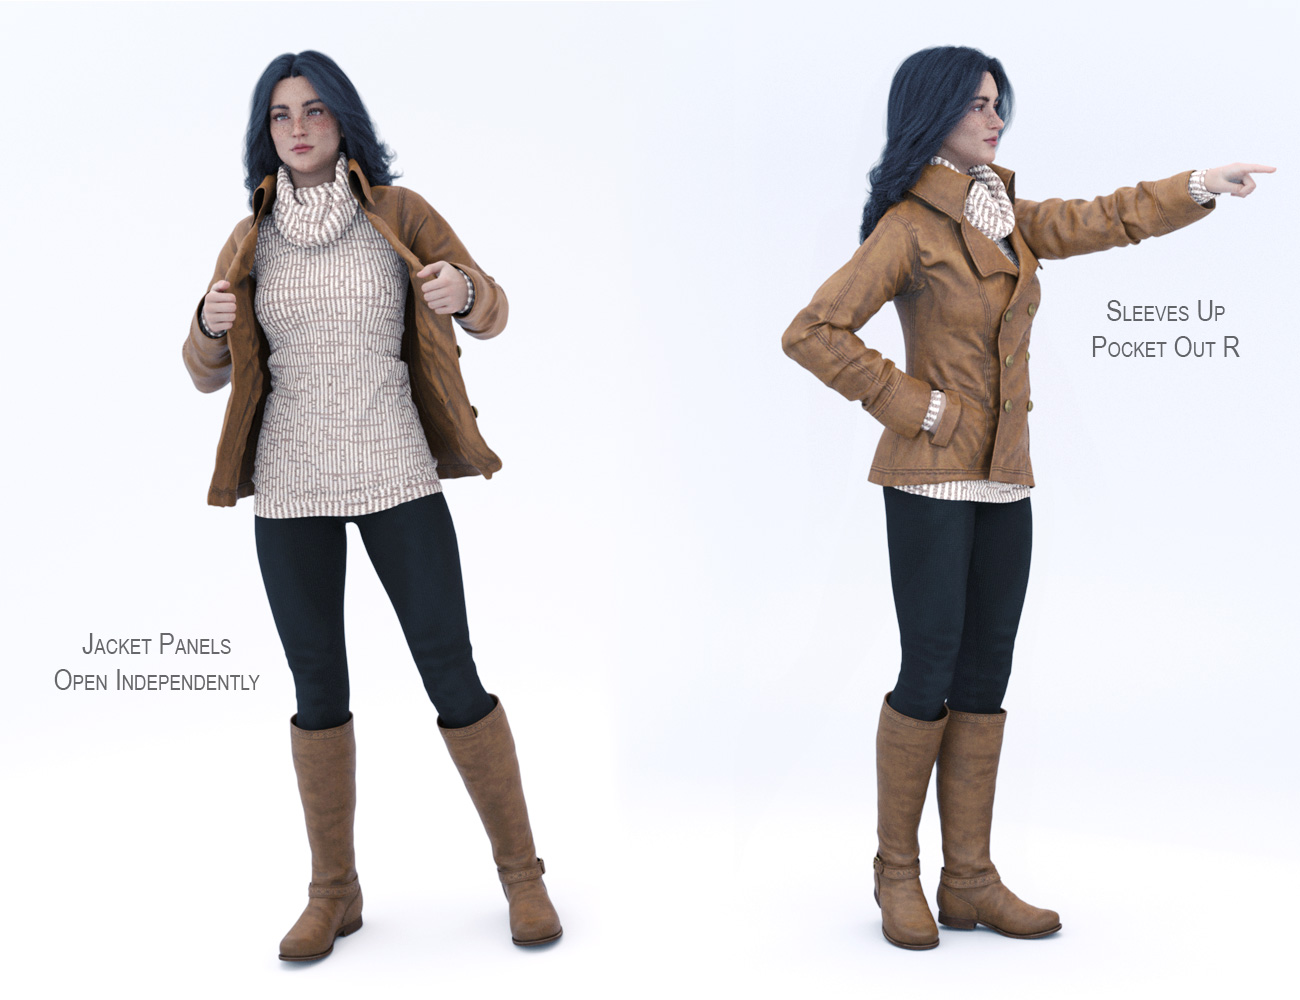 dForce Winter Trendy Outfit for Genesis 8 Female(s) by: Hypertaf, 3D Models by Daz 3D